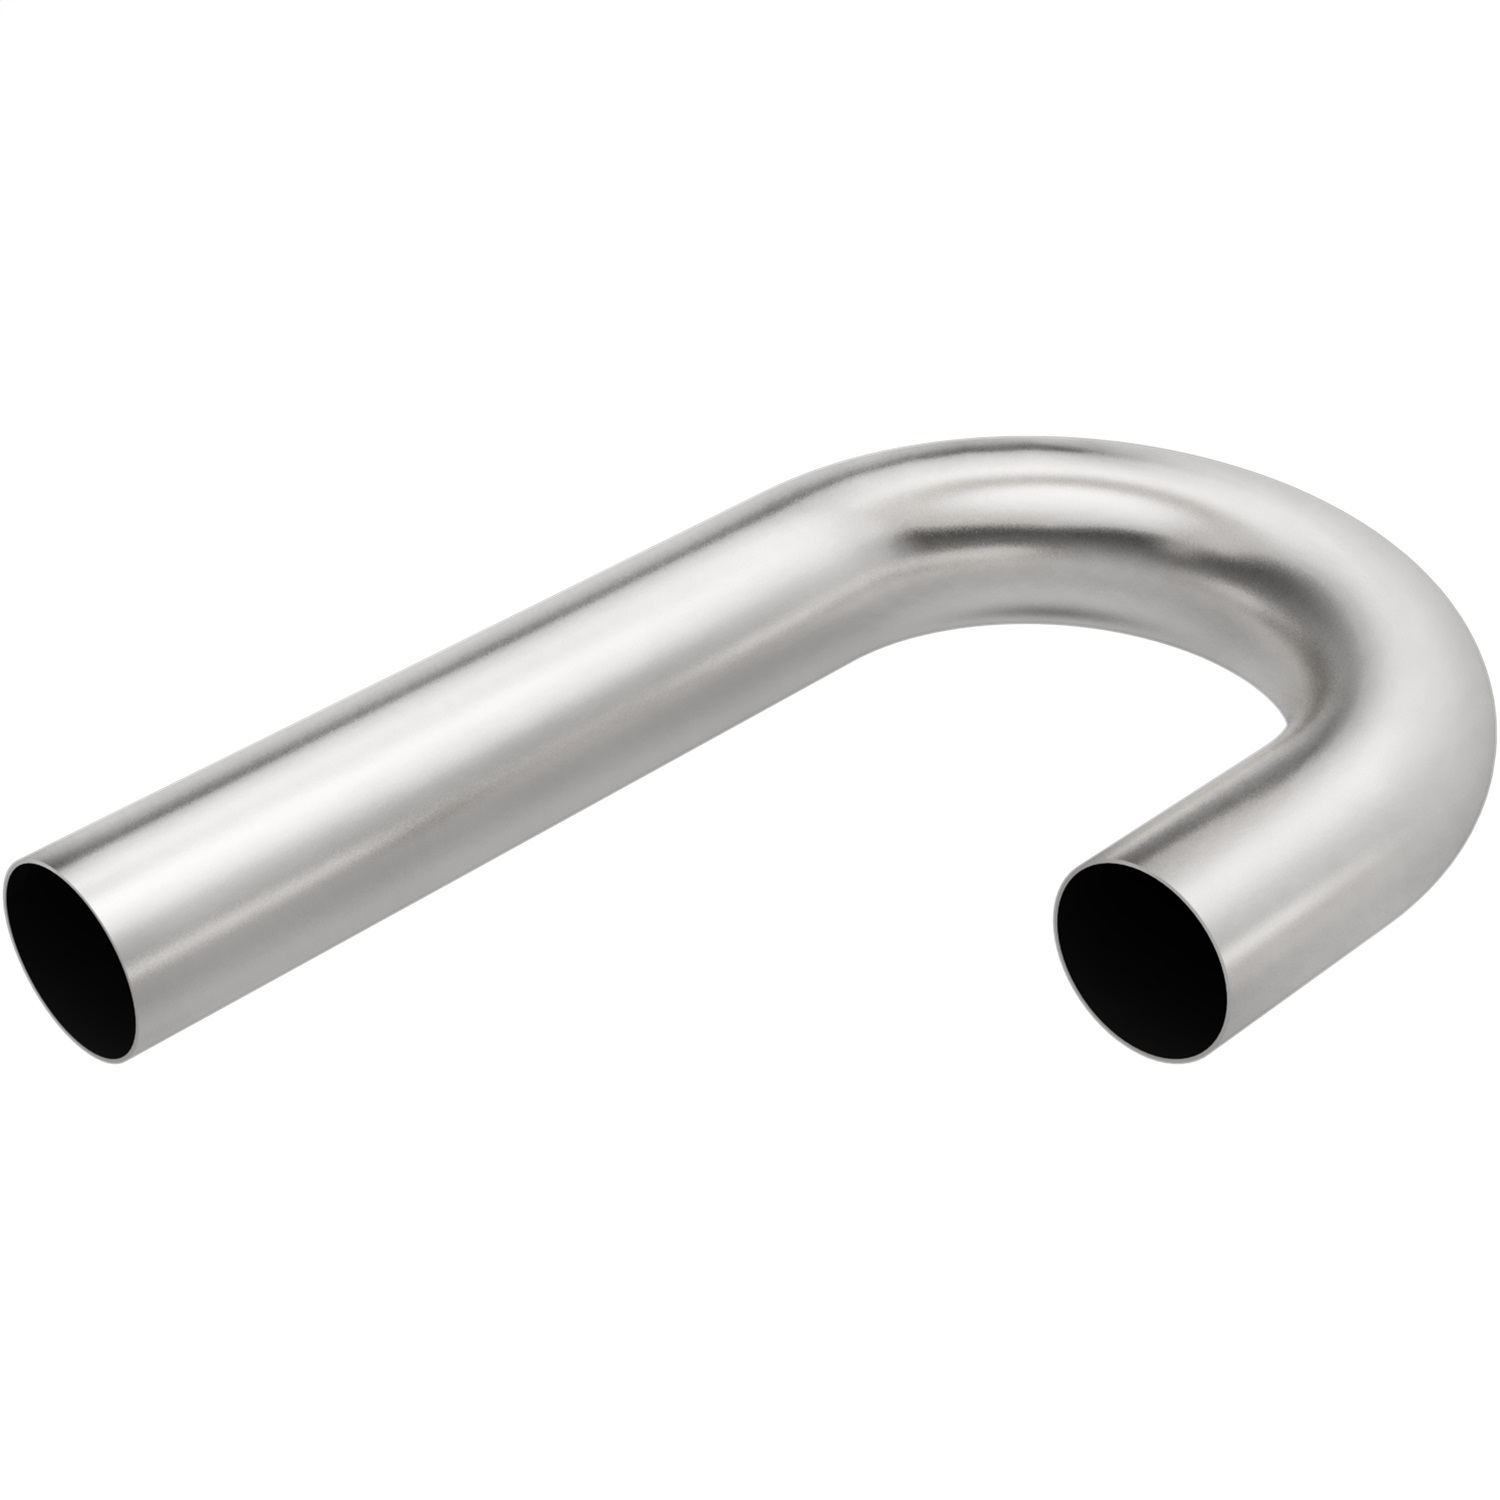 Magnaflow Performance Exhaust Magnaflow Performance Exhaust 10719 Smooth Transitions Exhaust Pipe